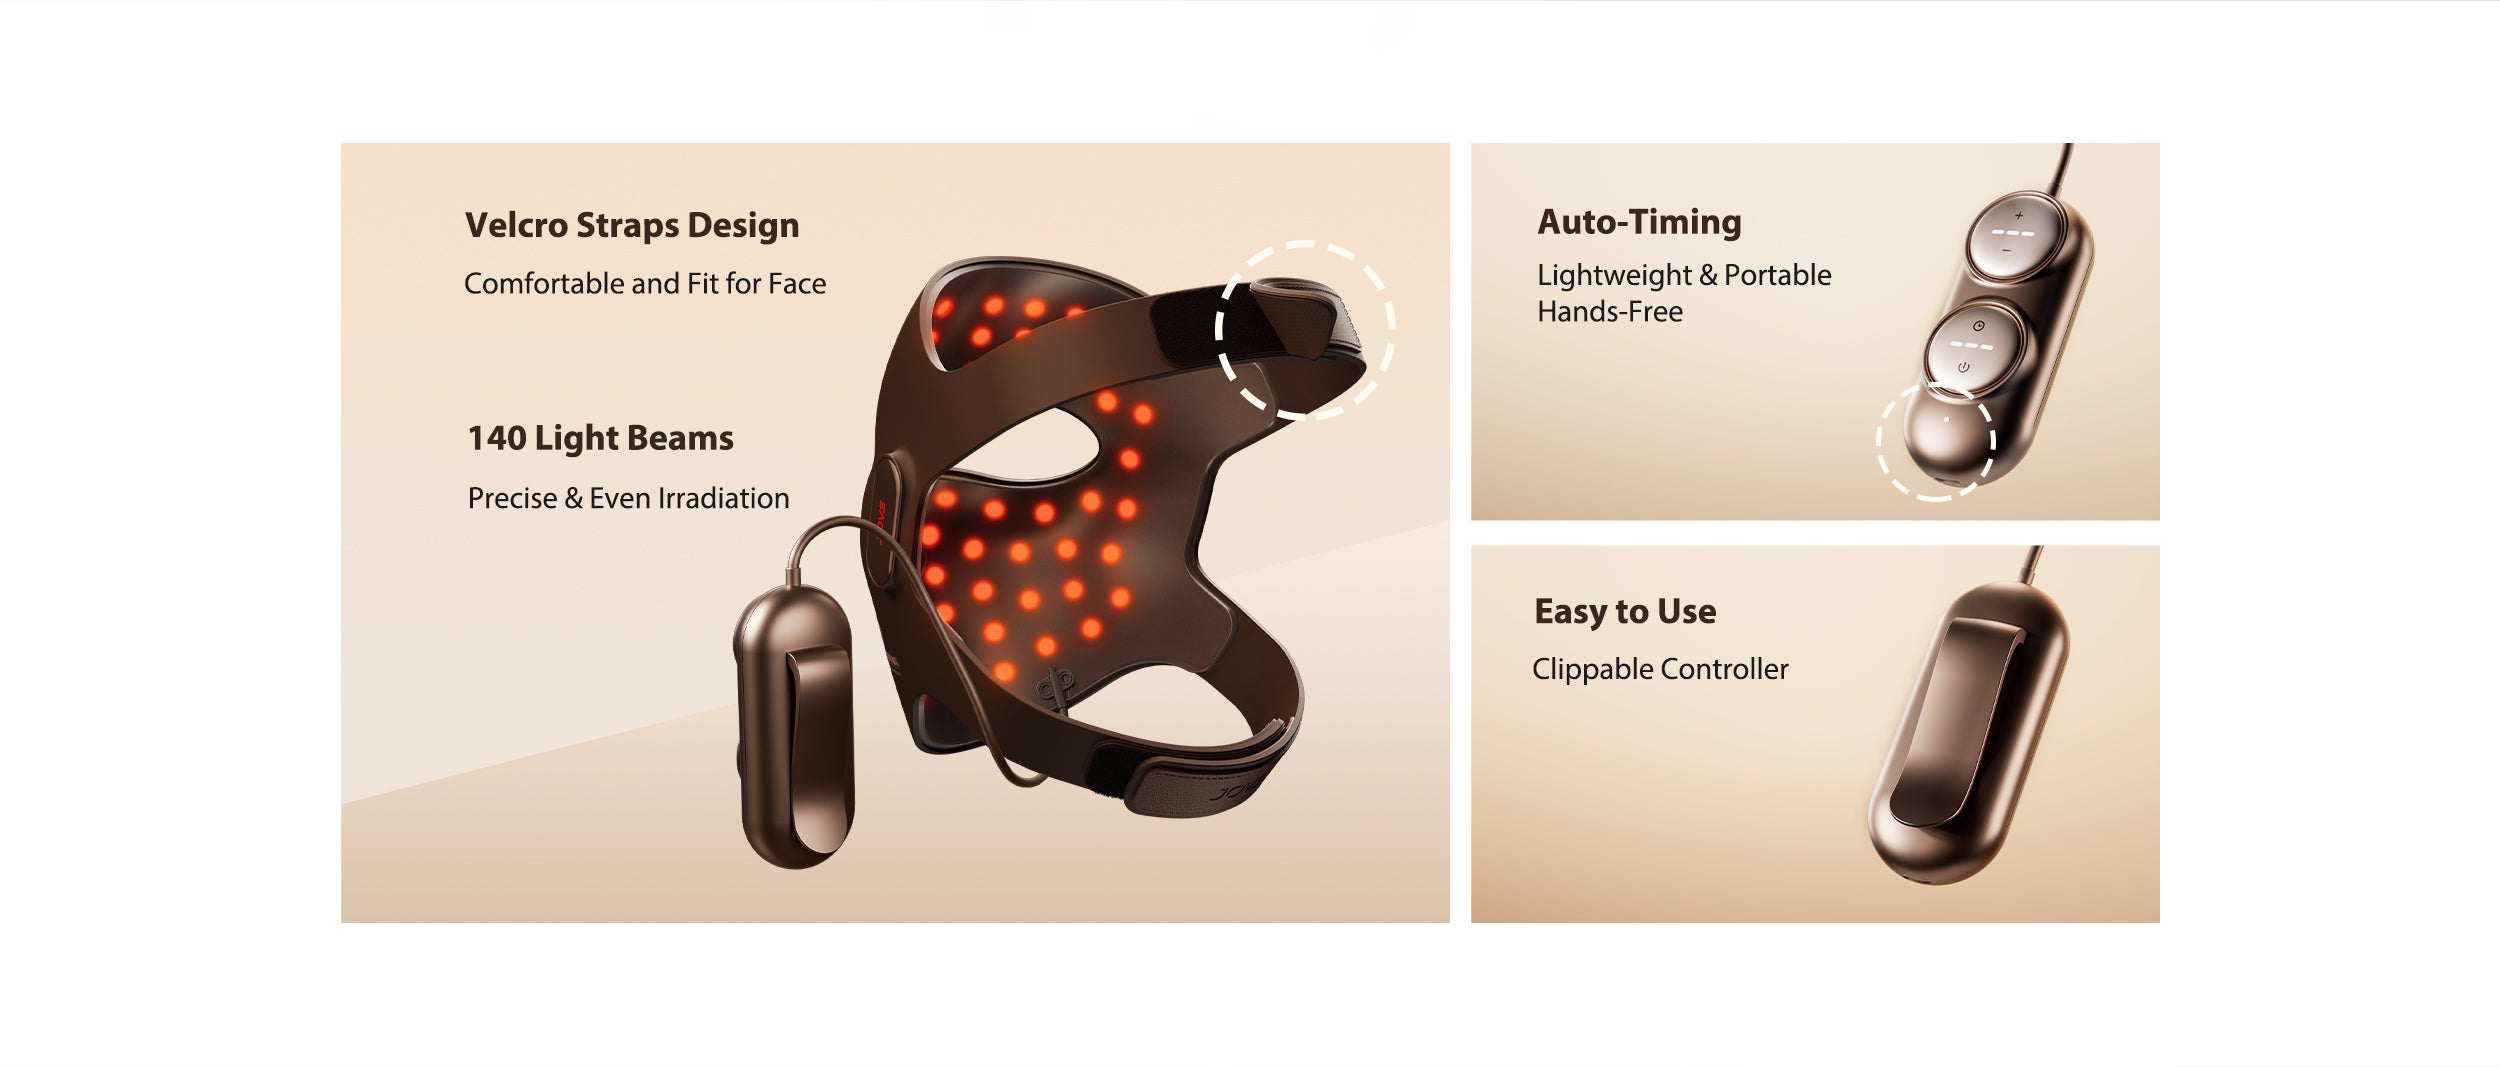 Advanced JOVS 4D Laser Light Therapy Mask with 140 light beams for precise treatment, comfortable Velcro straps design, auto-timing feature, and an easy-to-use clippable controller.